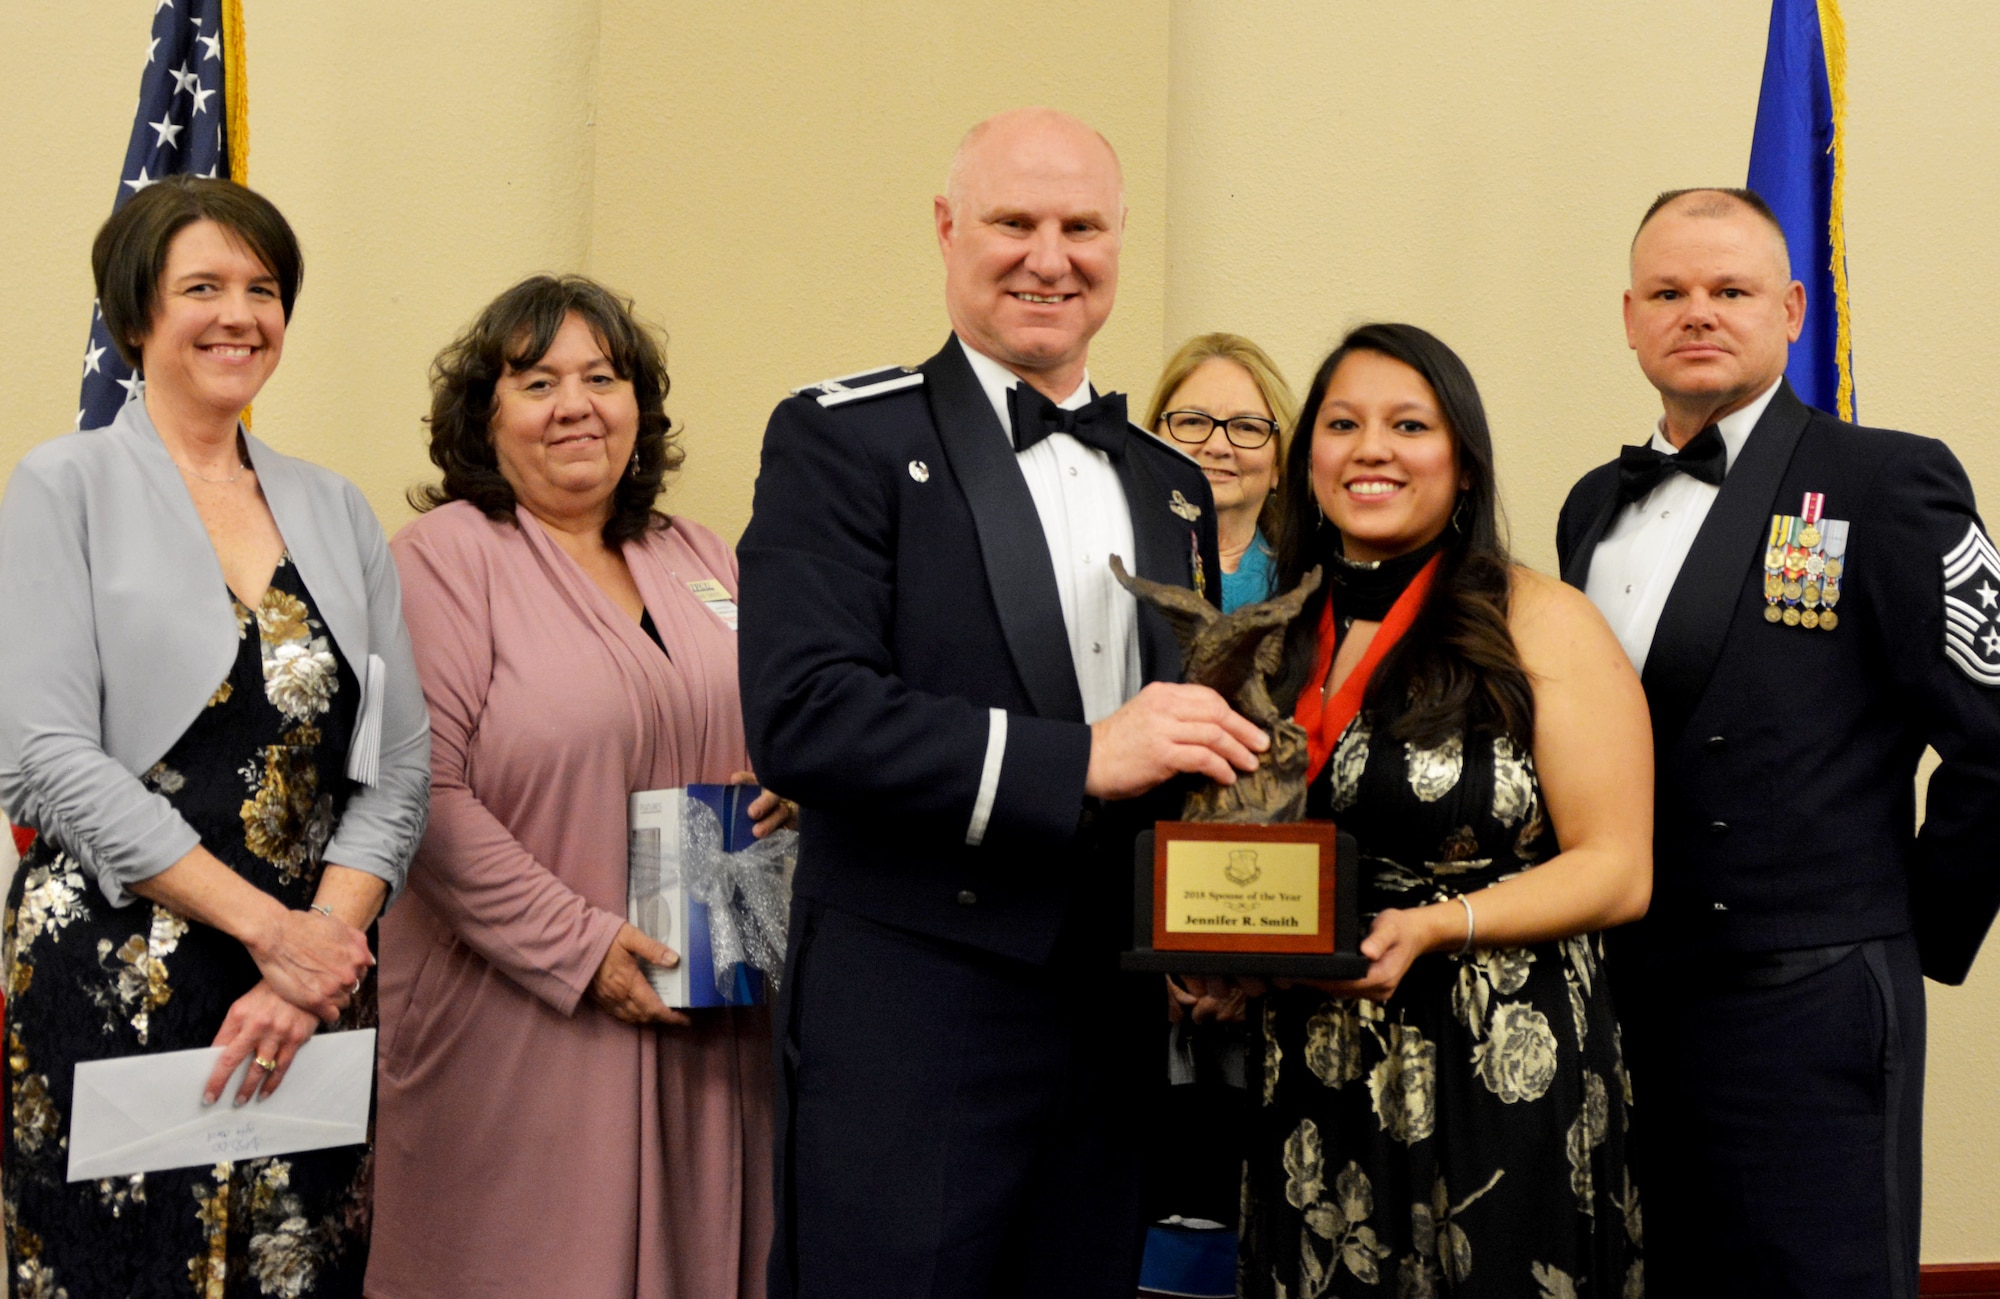 Col. Miles Heaslip, 507th Air Refueling Wing commander, and Chief Master Sgt. David Dickson, 507th ARW command chief, along with wing community partners, present the 507th ARW Spouse of the Year award to Mrs. Jennifer Smith, March 2, 2019, in Midwest City, Oklahoma. (U.S. Air Force photo by Maj. Jon Quinlan)